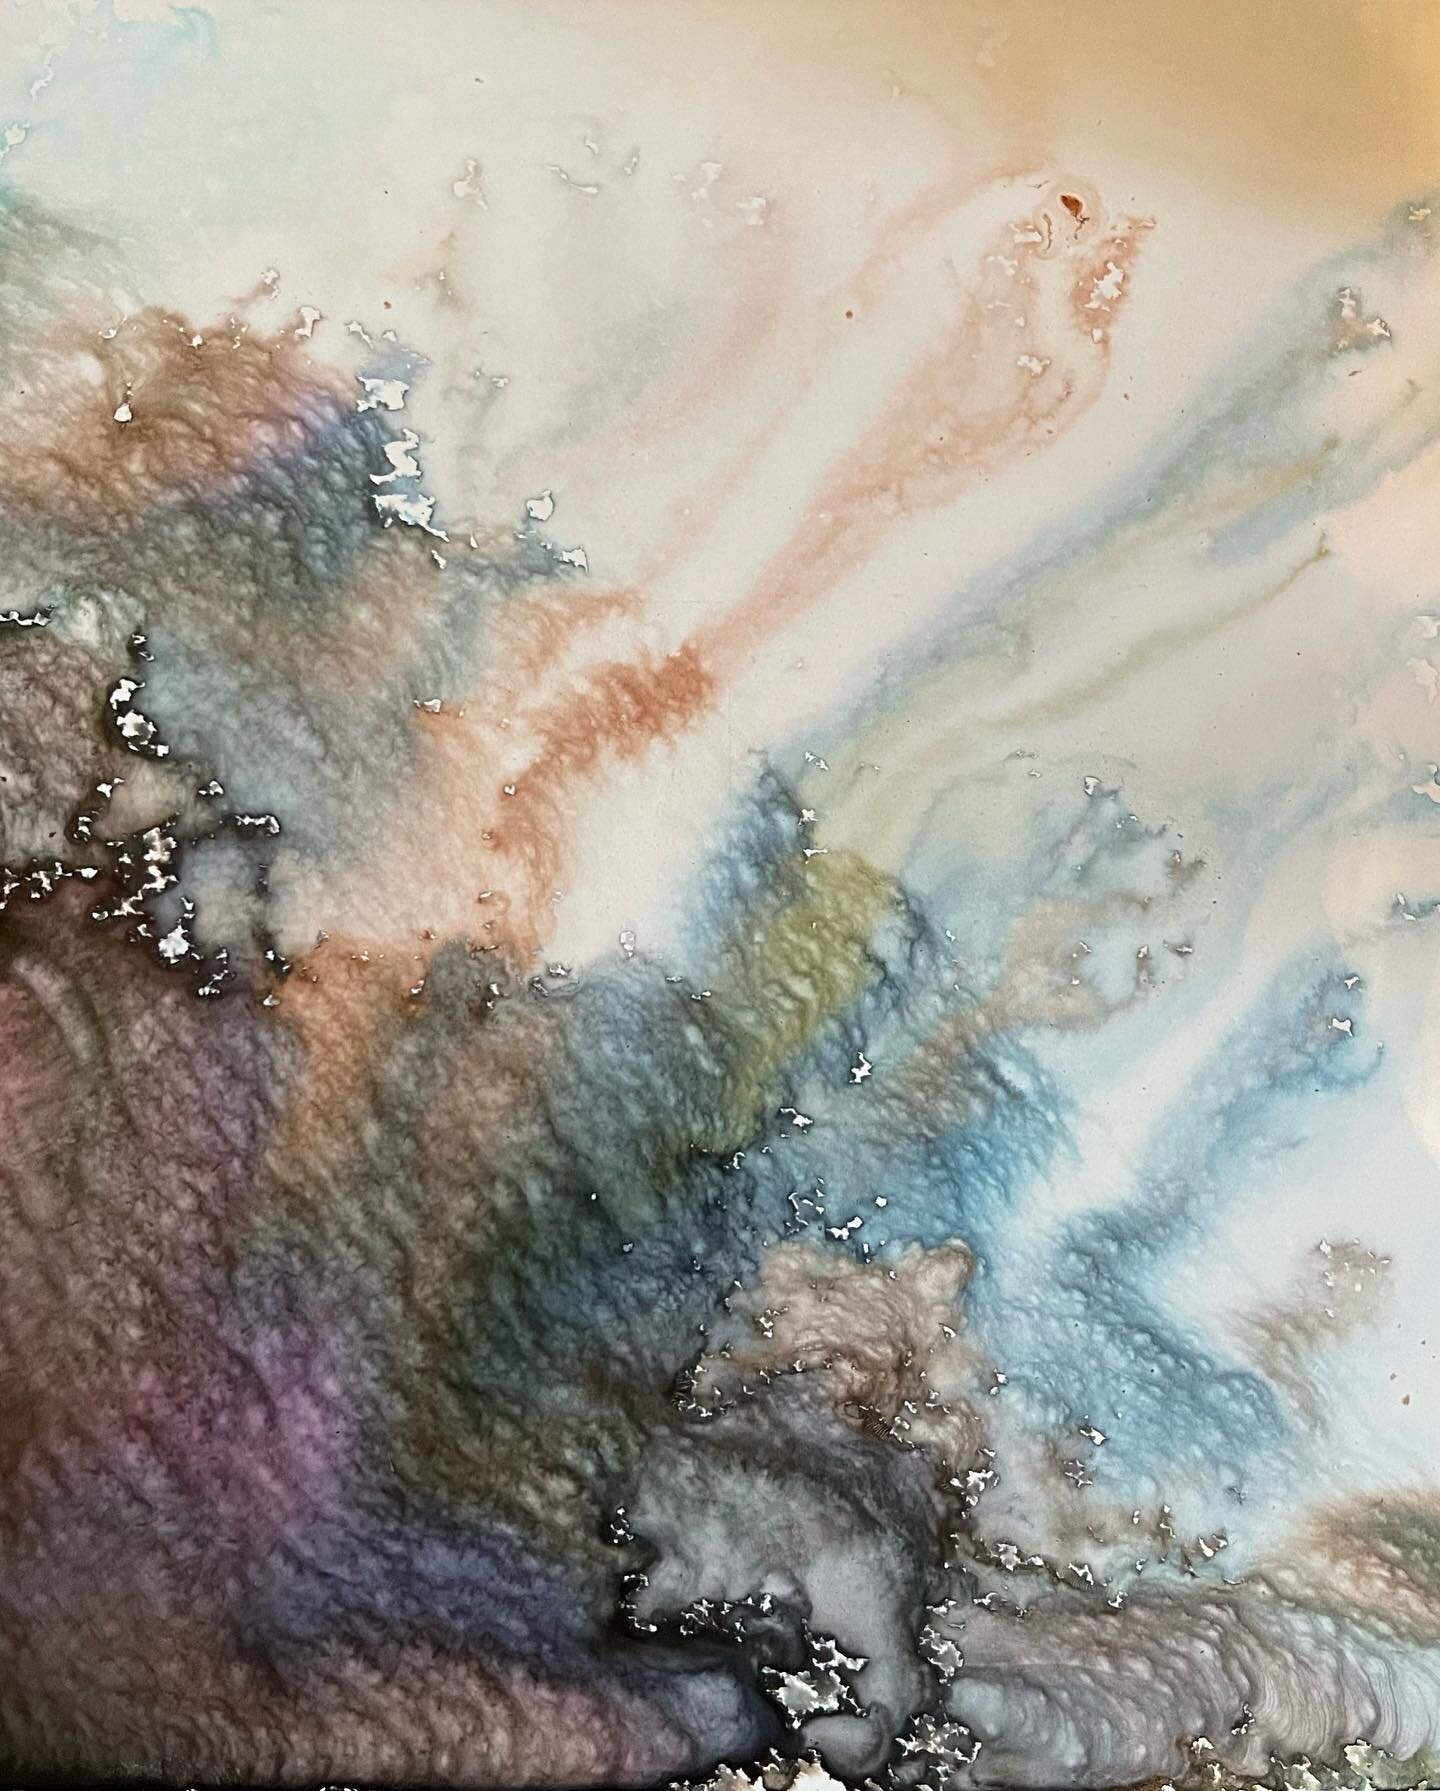 Playing with botanical stains on gesso board&hellip;love the results🫶 sealing it with a gloss medium to keep it from losing some of its magic✨A fun way to start an abstract. 

* #myartwork🎨 
* #coolarts 
* #funartnotfineart 
* #abstractartworks 
* 